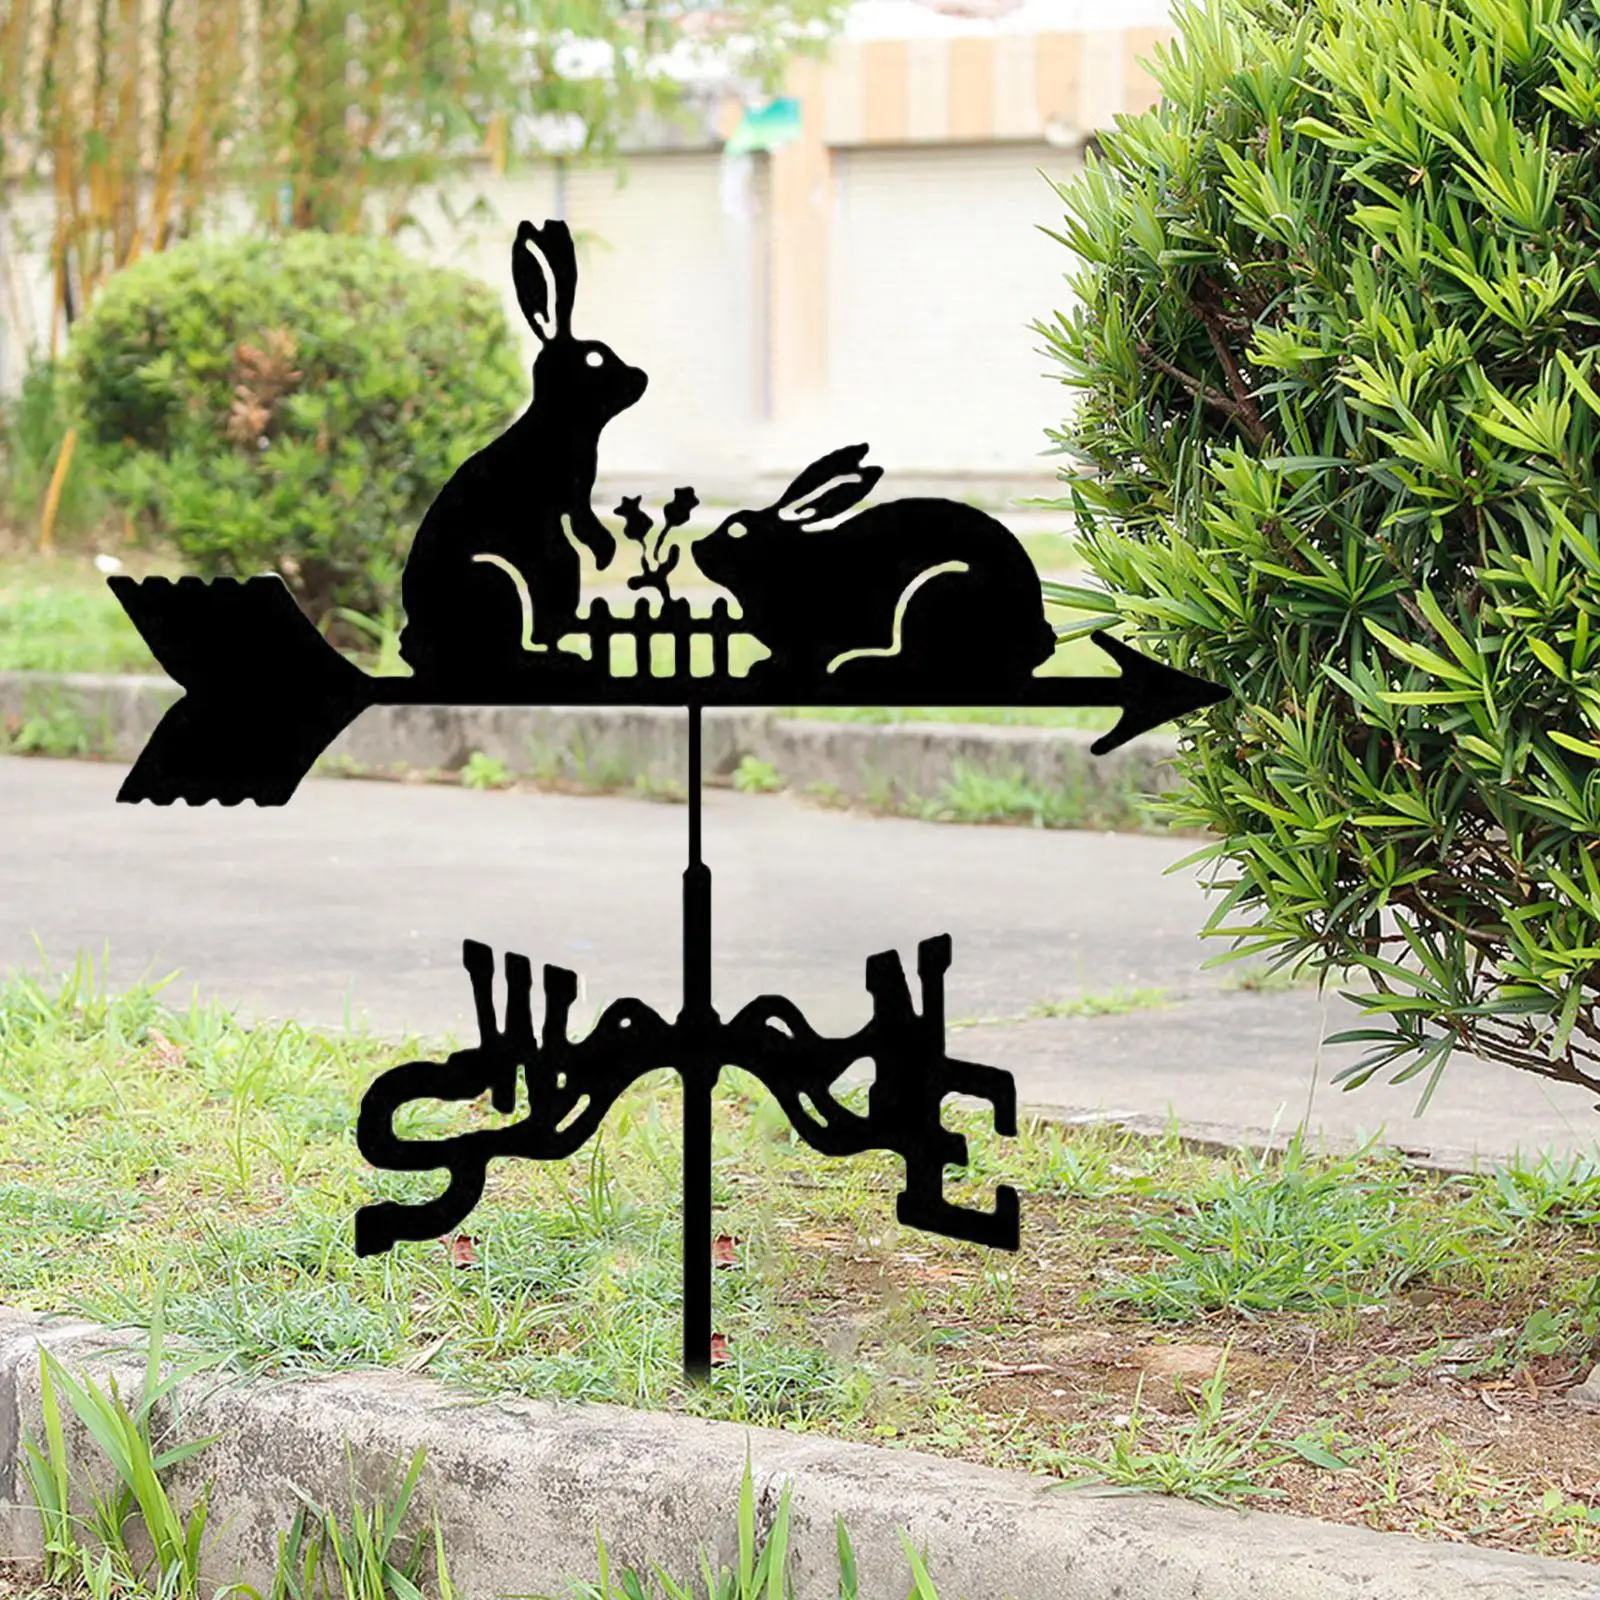 Metal Weather Vane Rabbit Shaped Ornaments Accessories for Outdoor Garden with Rabbit Ornament Retro Wind Direction Indicator